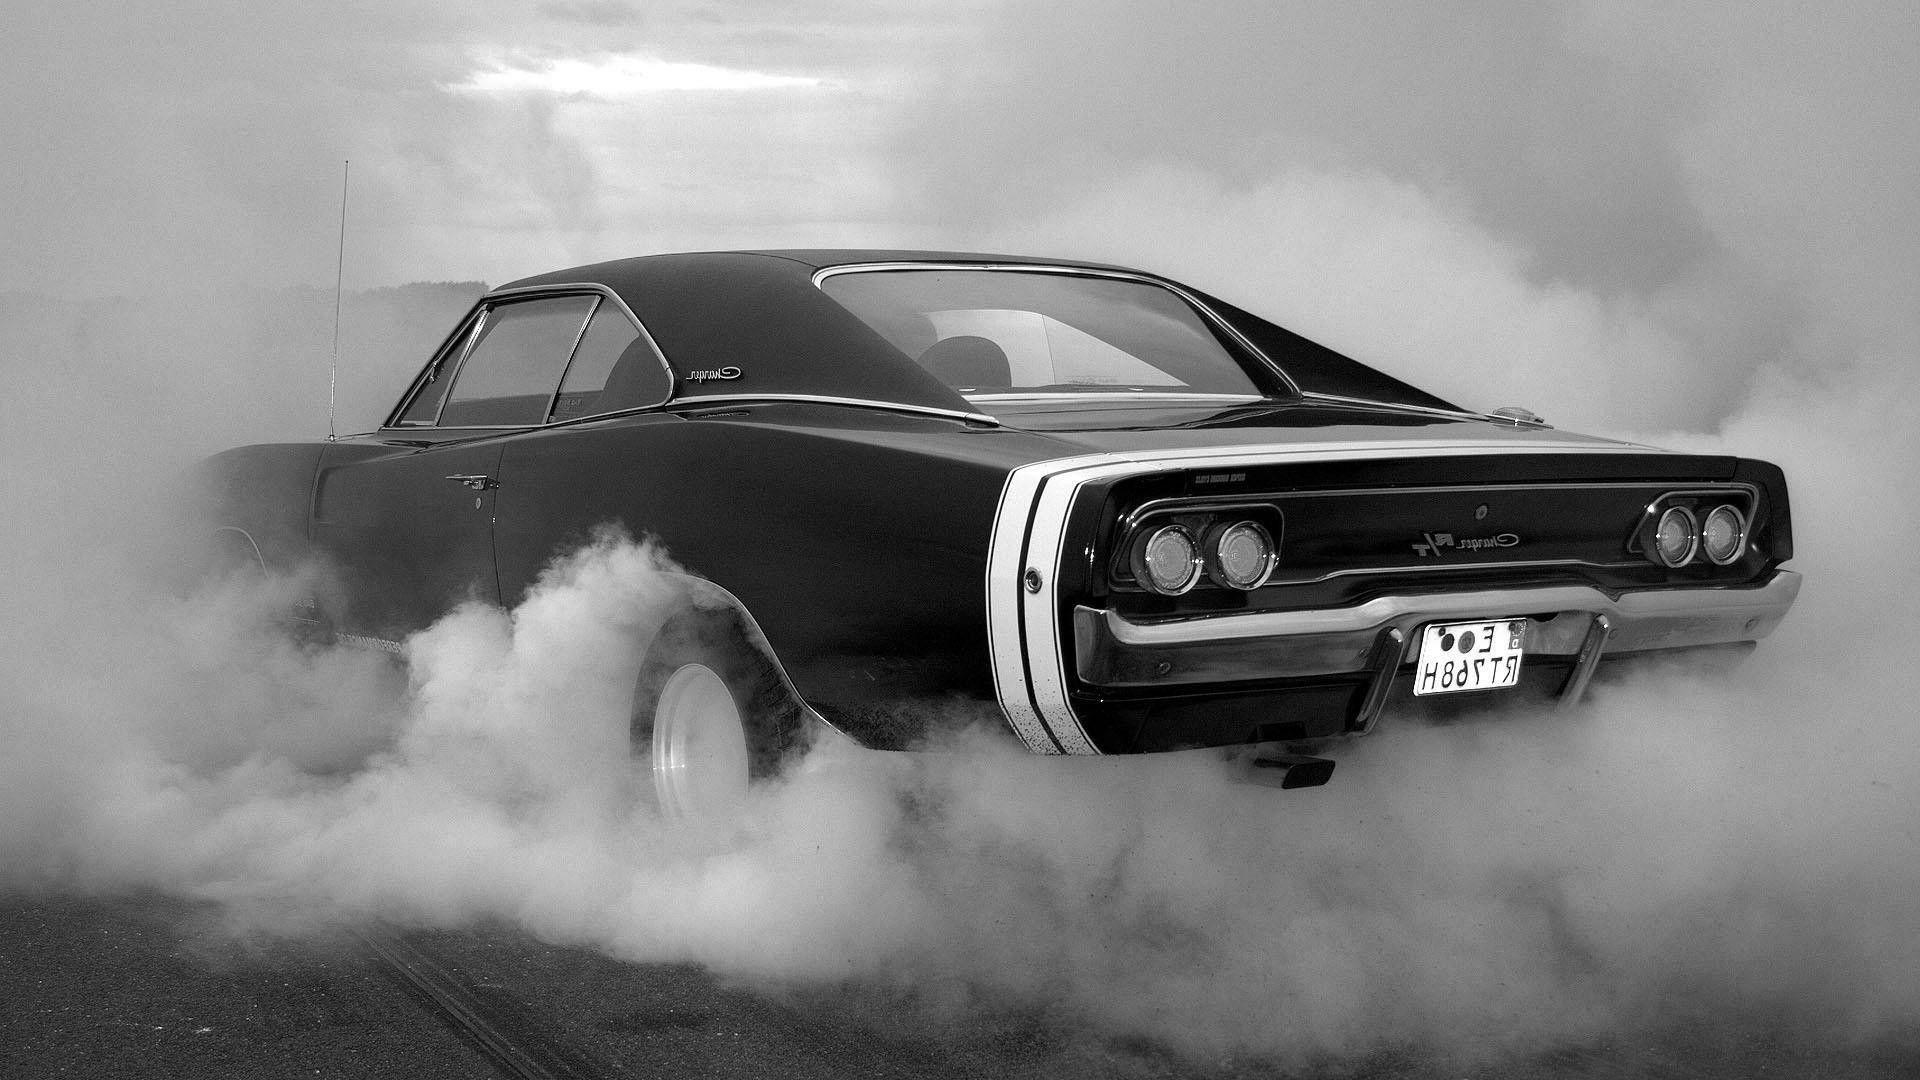 awesome Cool Muscle Car Desktop Wallpaper. Muscle cars, Car